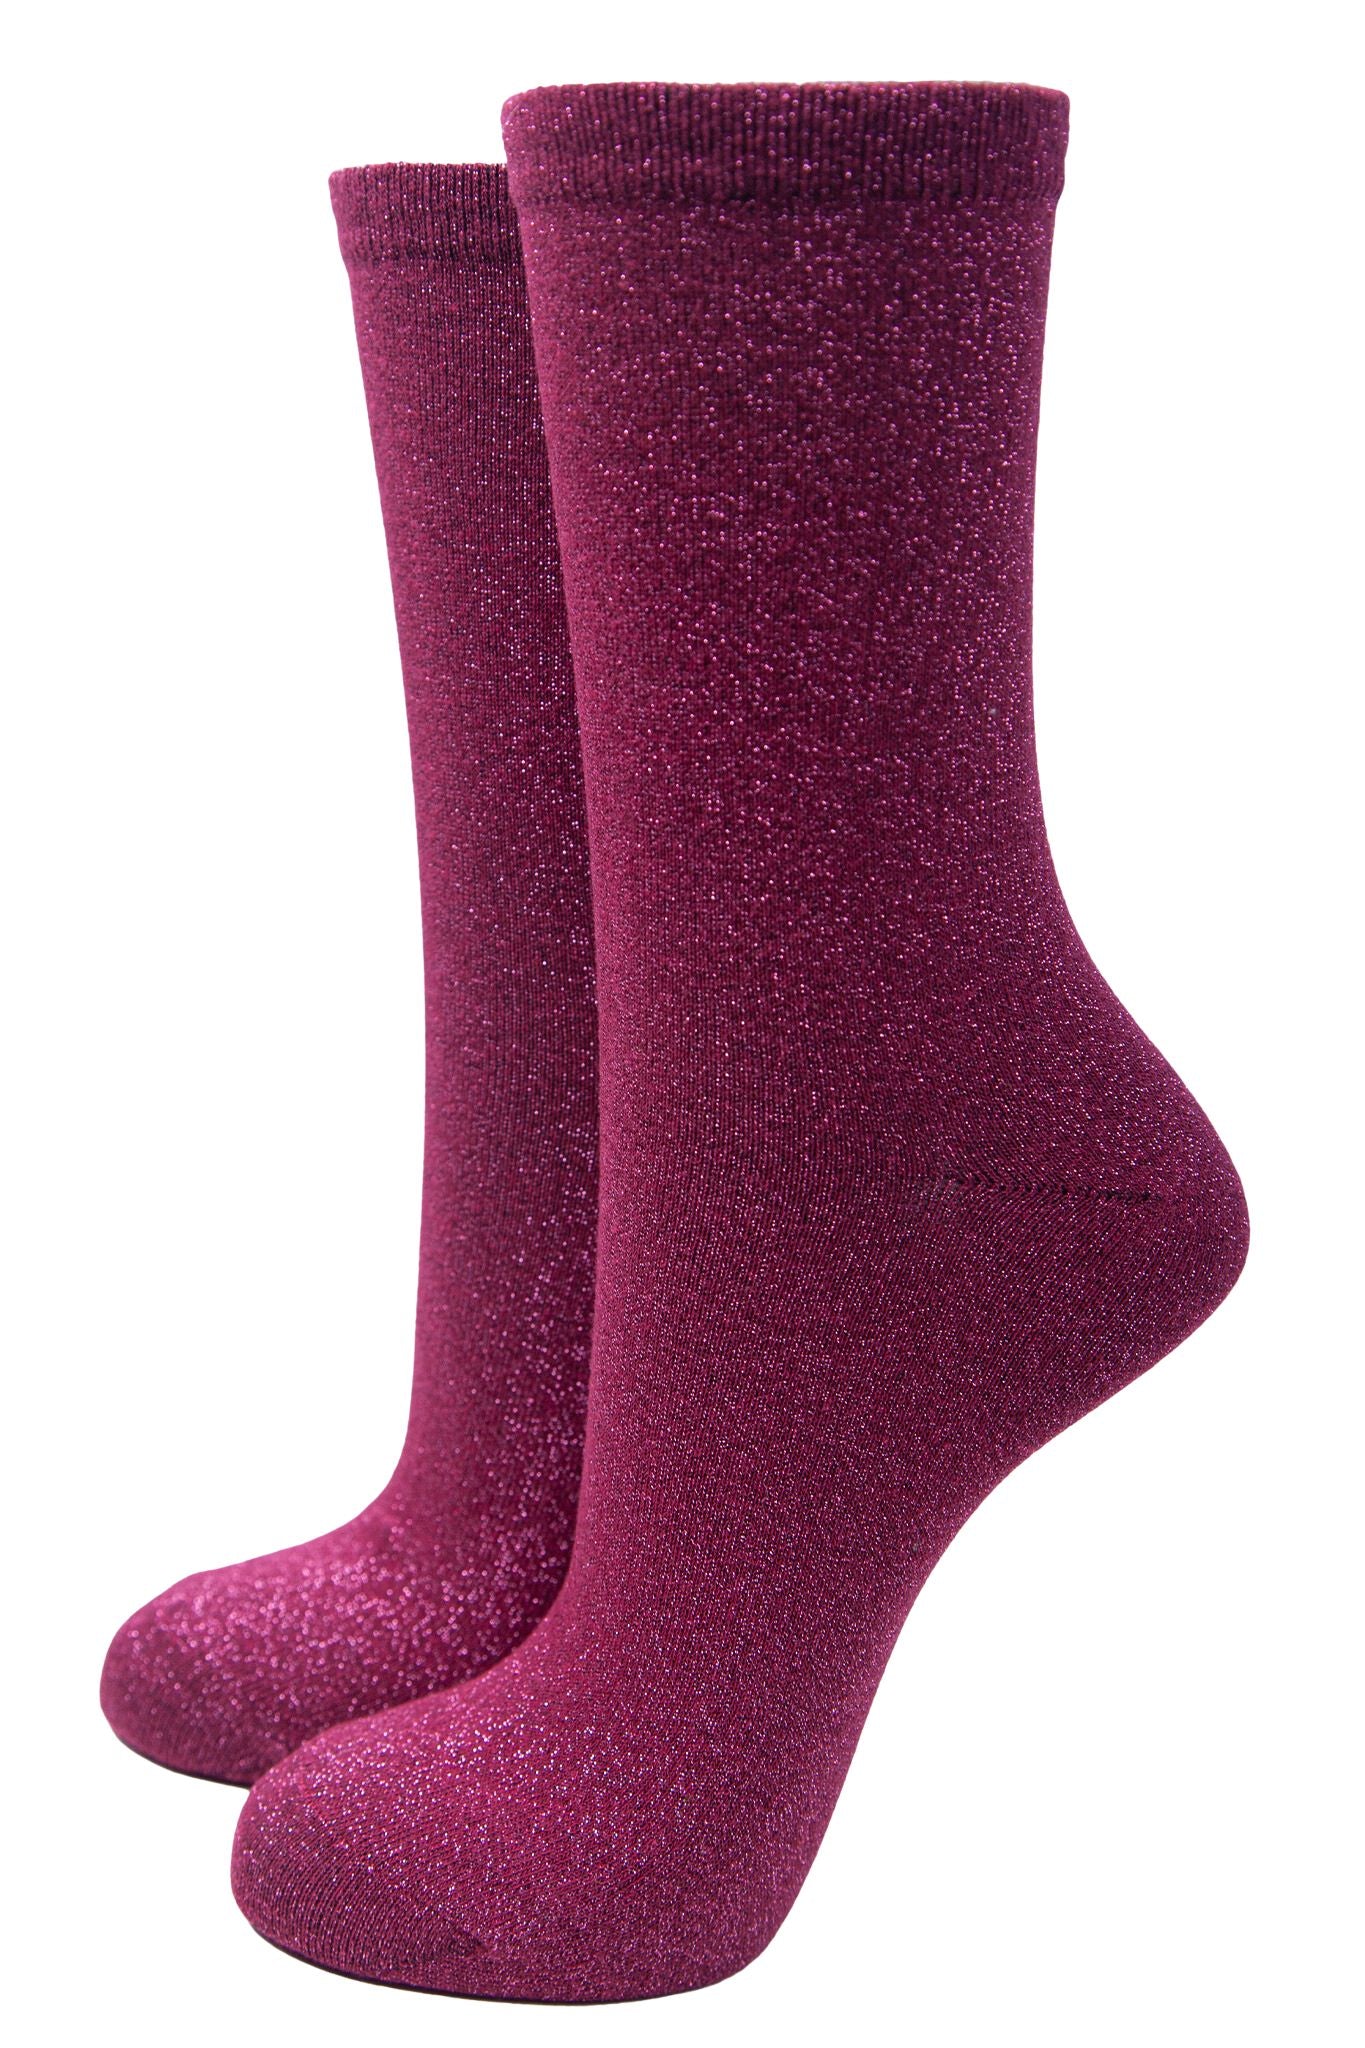 glitter ankle socks in a cranberry red with an all over pink shimmer